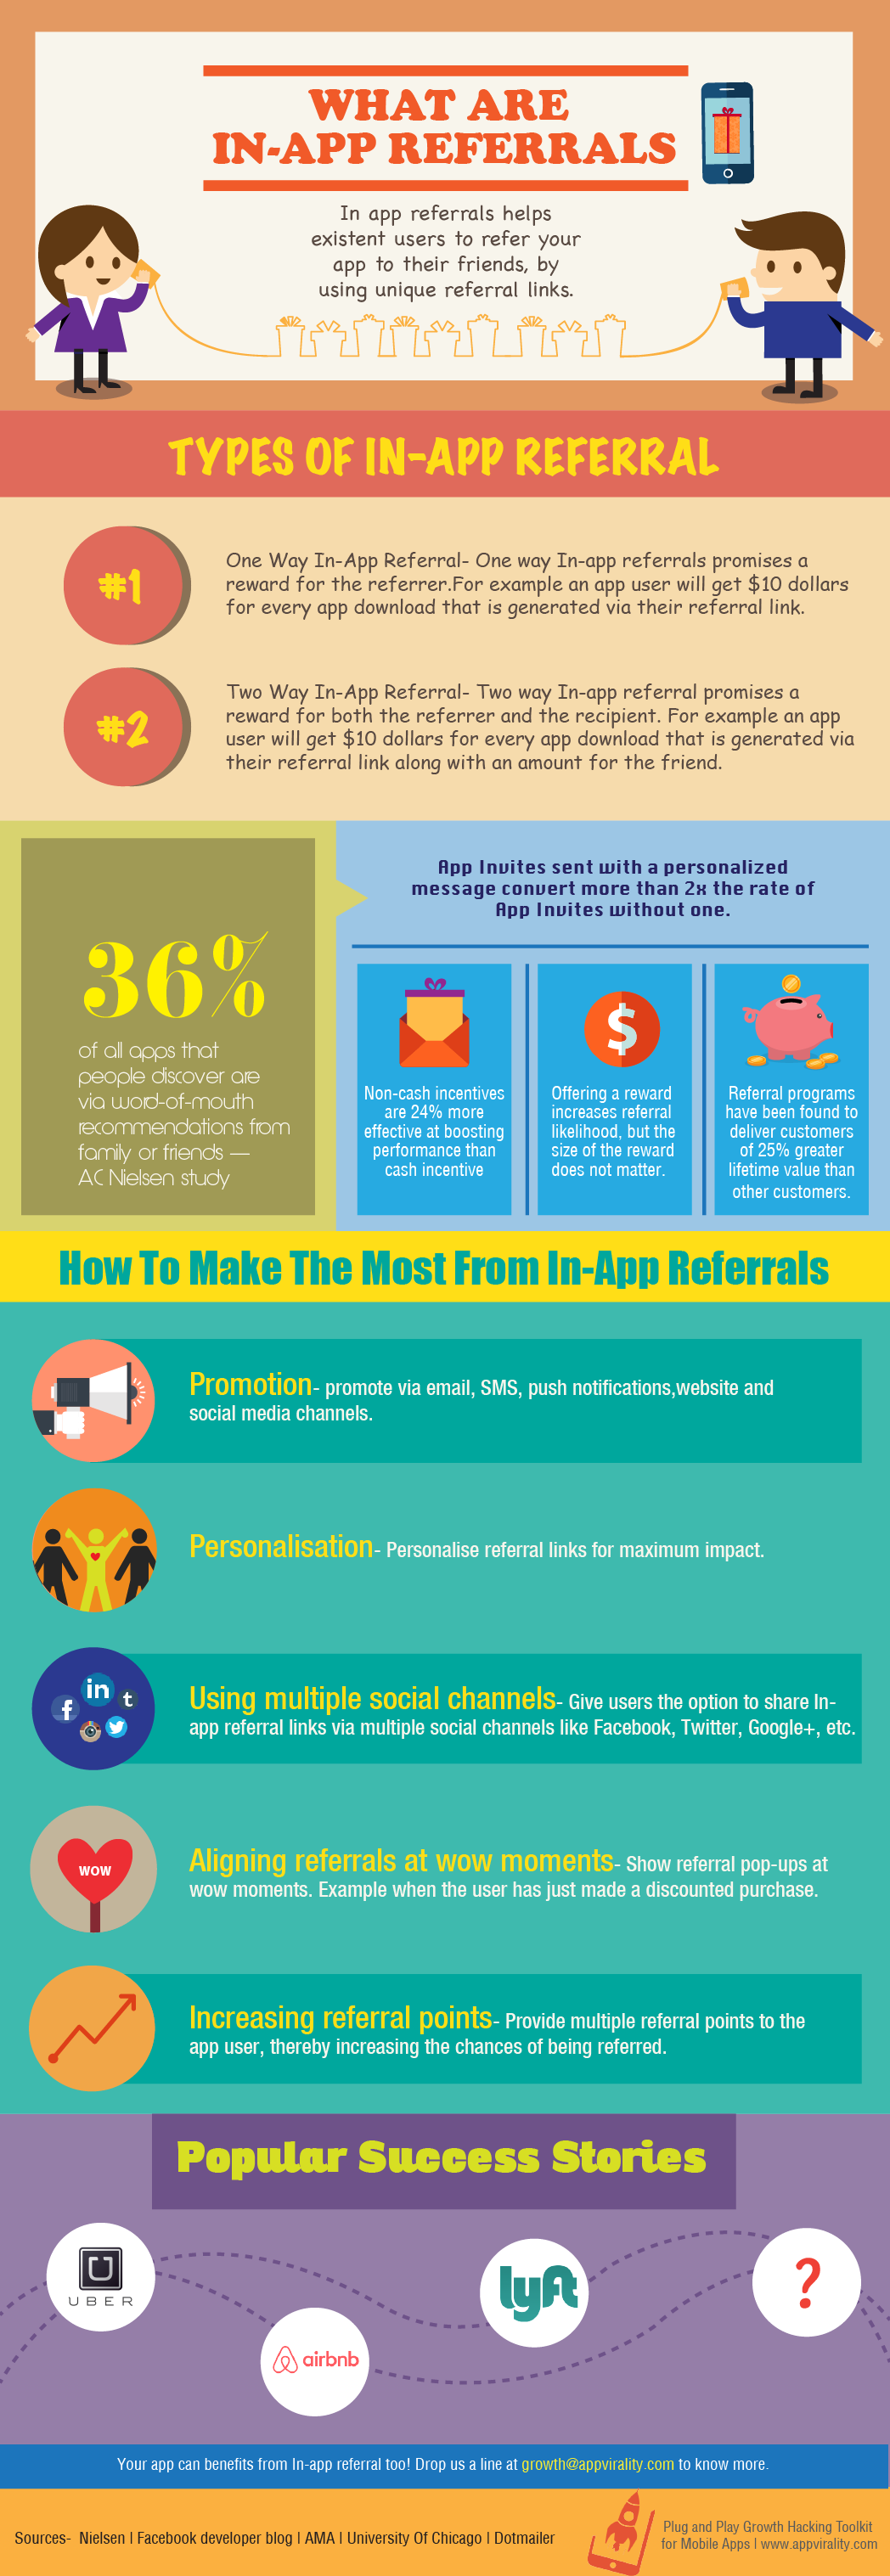 Infographic Everything You Need To Know About In-App Referrals